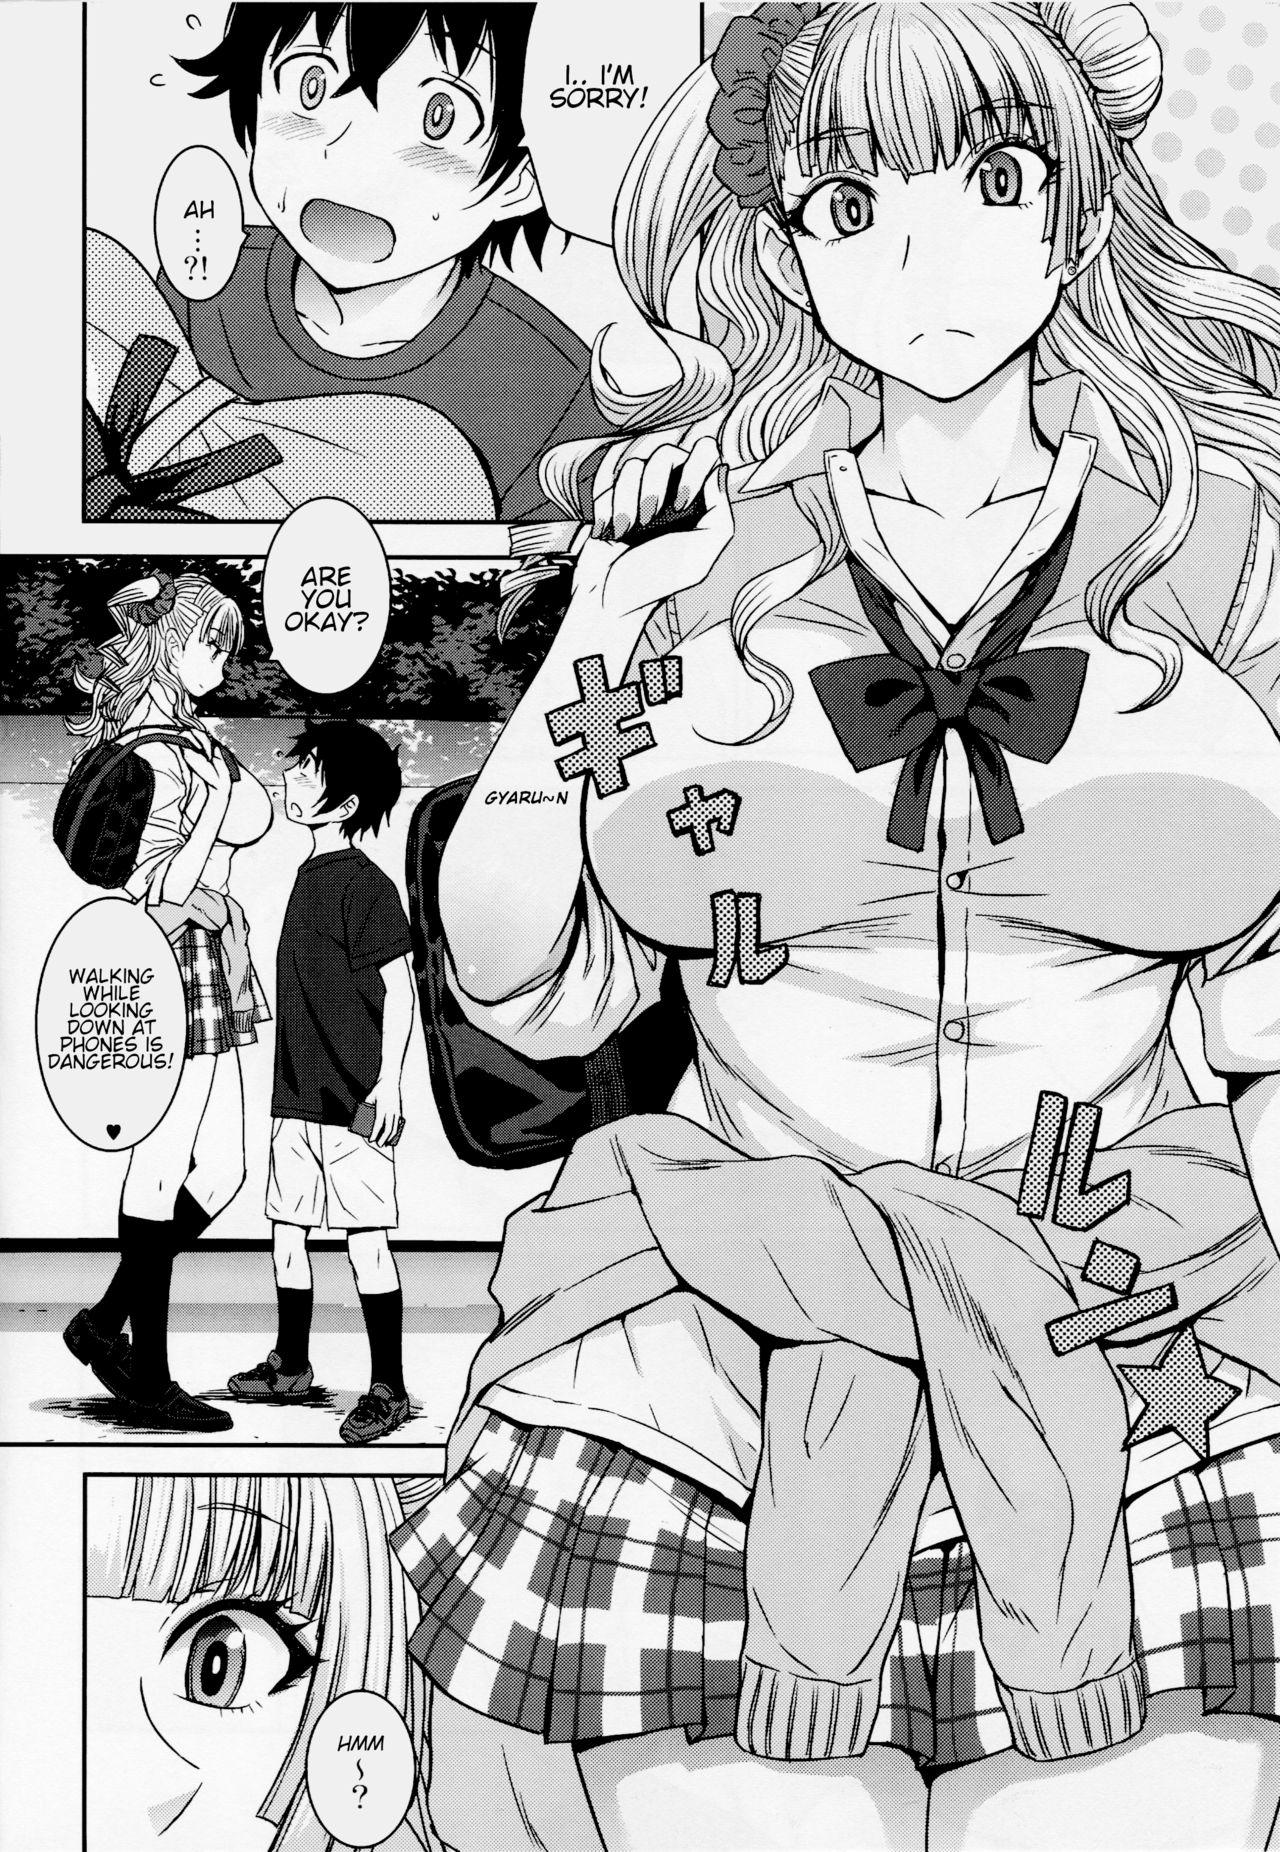 Gay Shop Boy Meets Gal - Oshiete galko chan Trimmed - Page 3